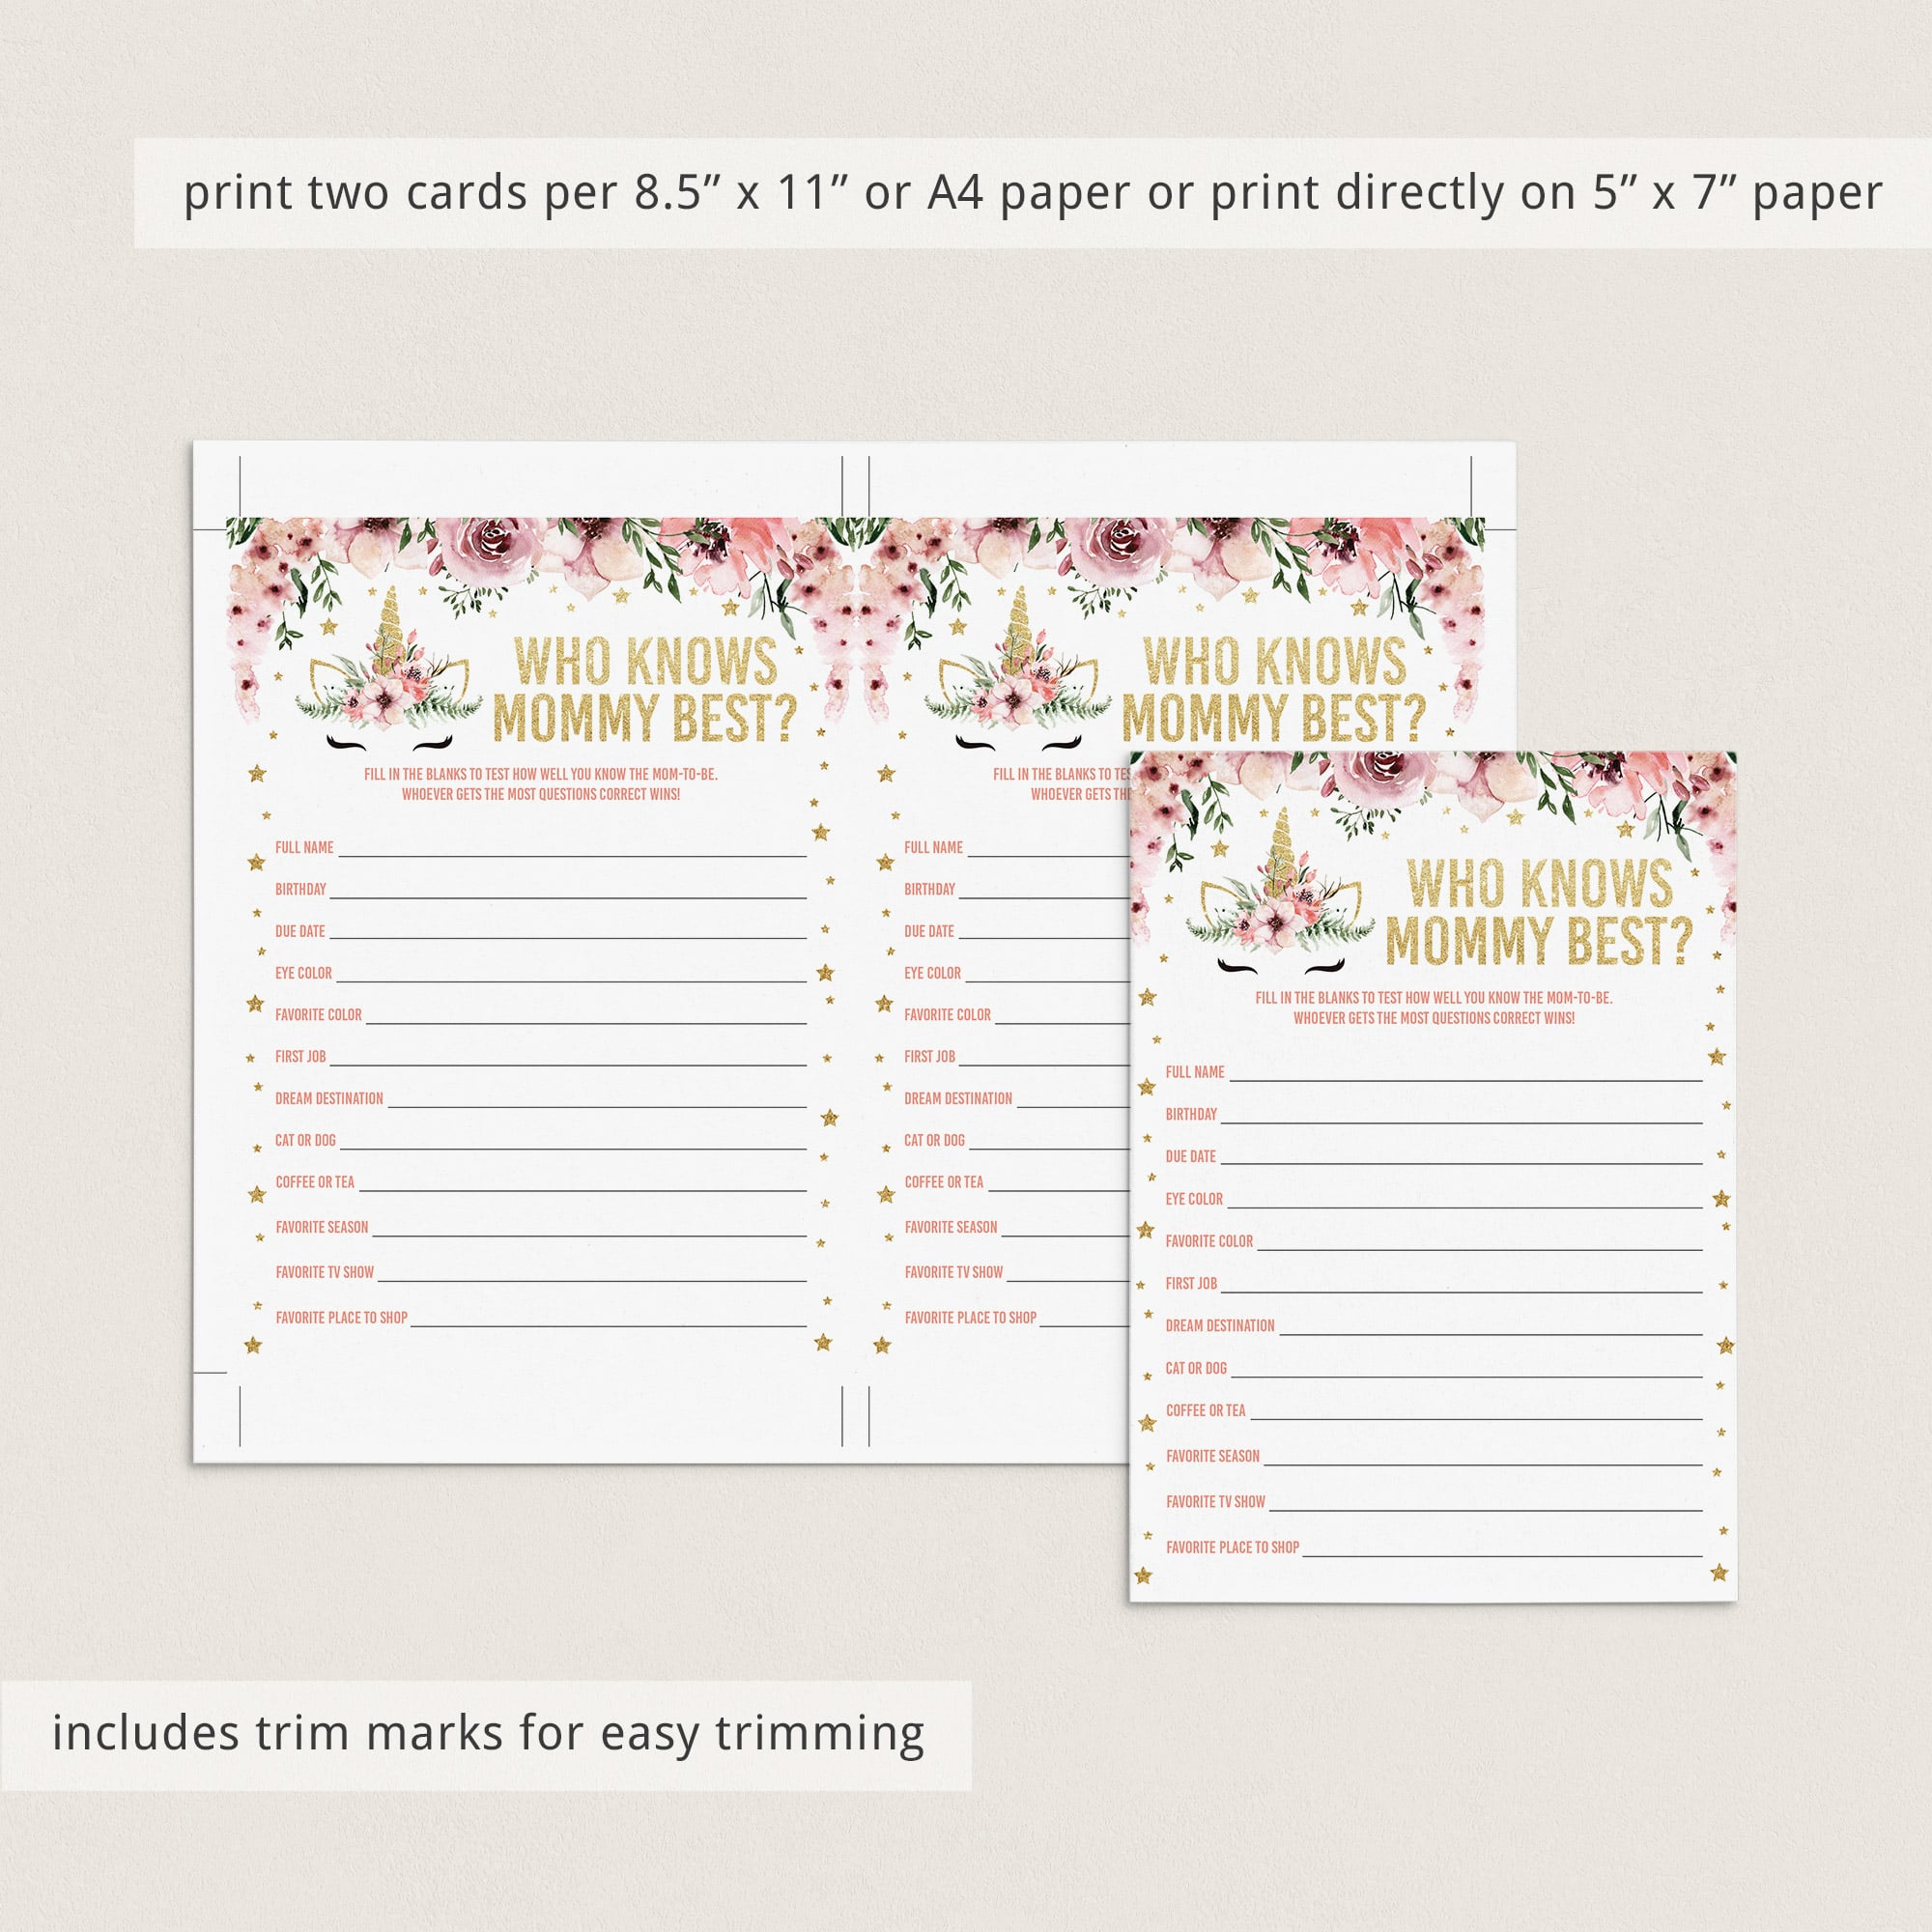 Who knows mummy best baby shower game cards printable by LittleSizzle